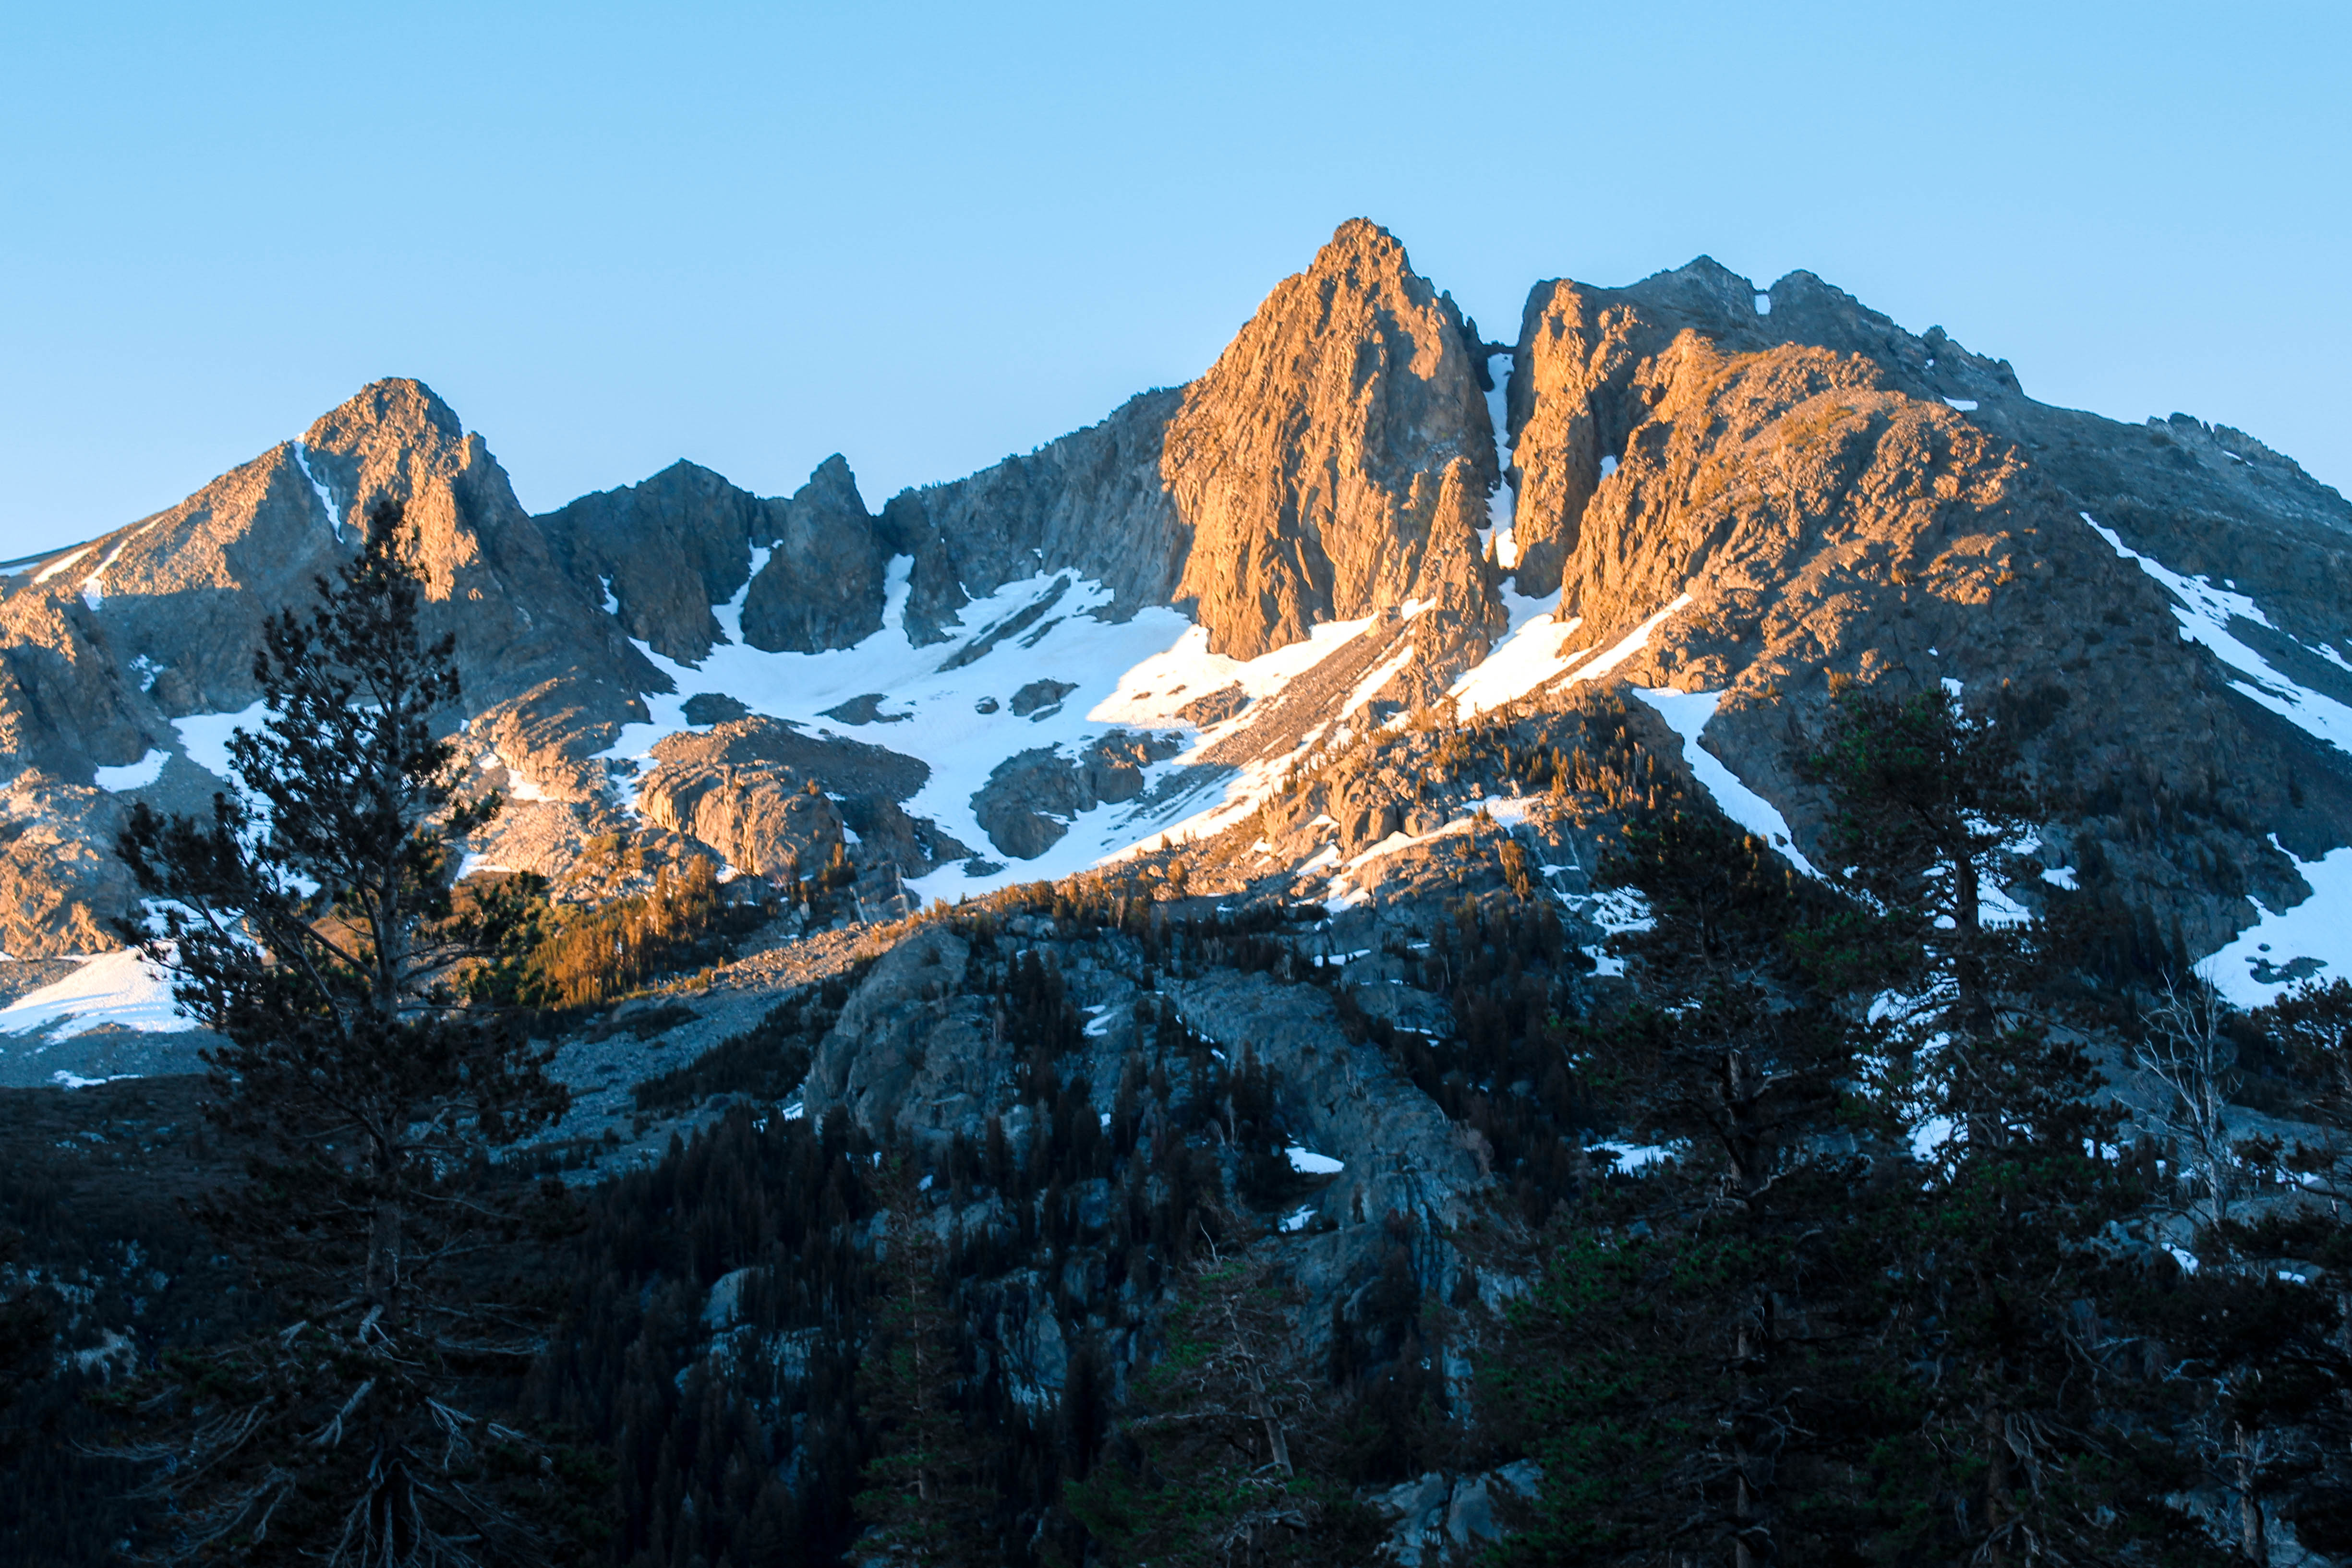 Alpine glow hangs over a bowl covered with steep snow fields and rocky outcroppings.